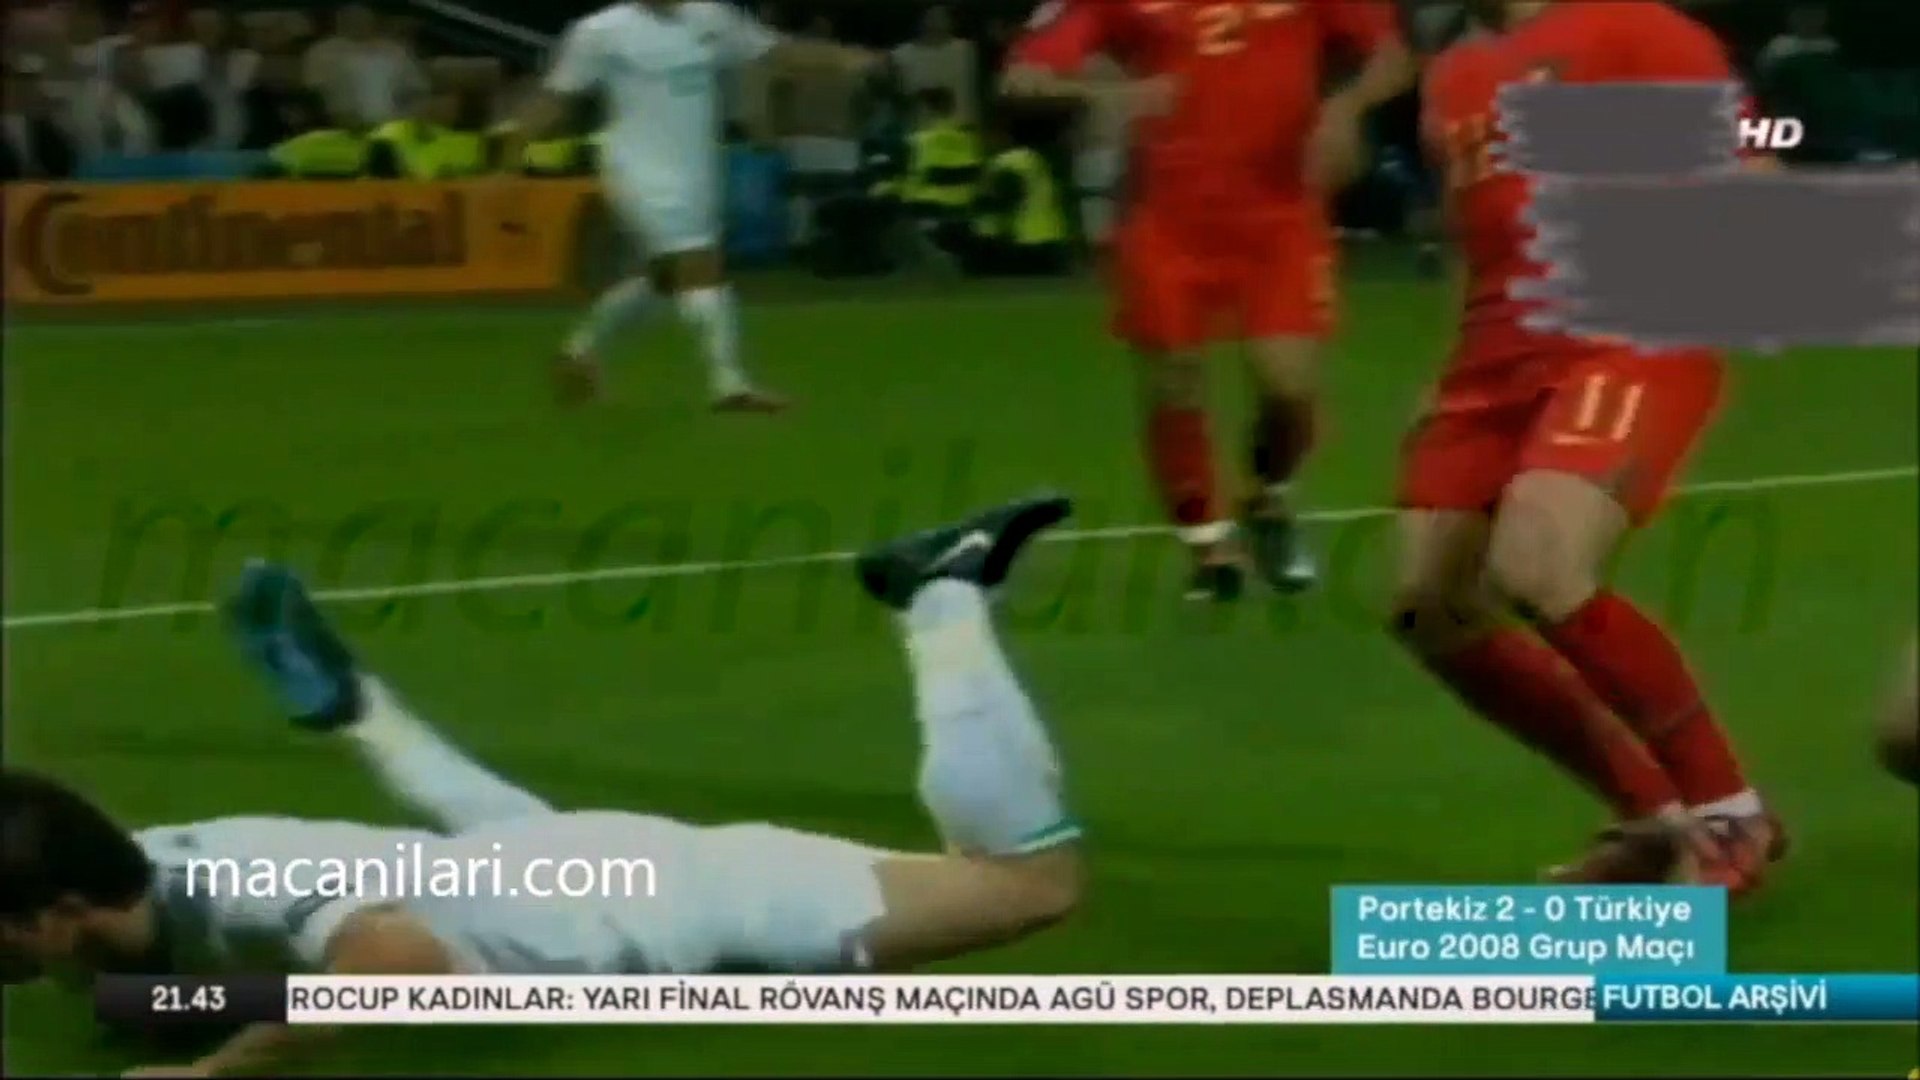 Portugal 2-0 Turkey [HD] 07.06.2008 - UEFA EURO 2008 Group A Matchday 1 -  Dailymotion Video